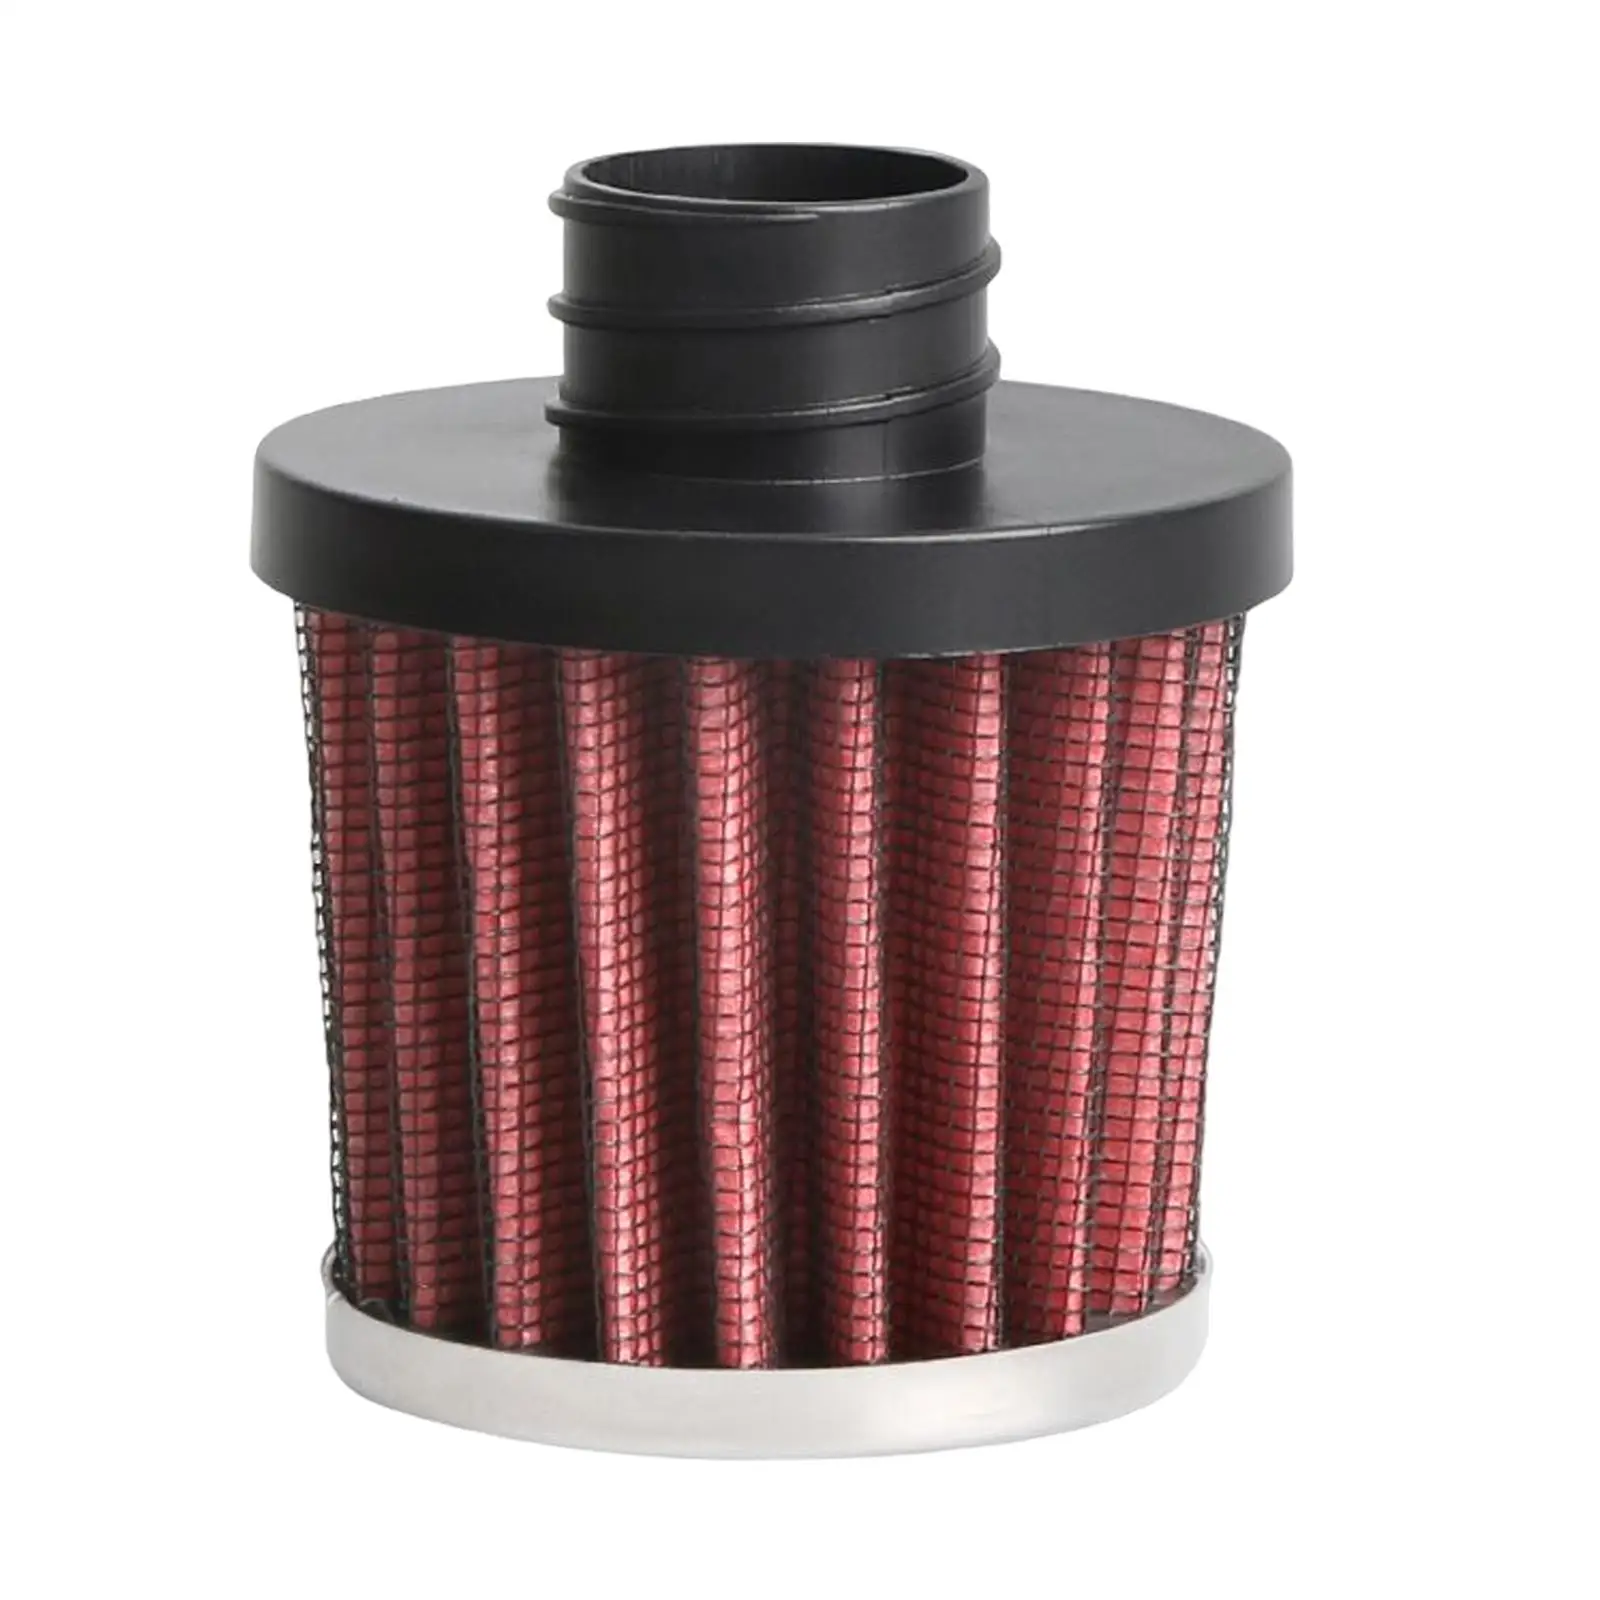 25mm Parking heating Air Filter Heaters Accessories Universal for Parking heating Replaces Durable